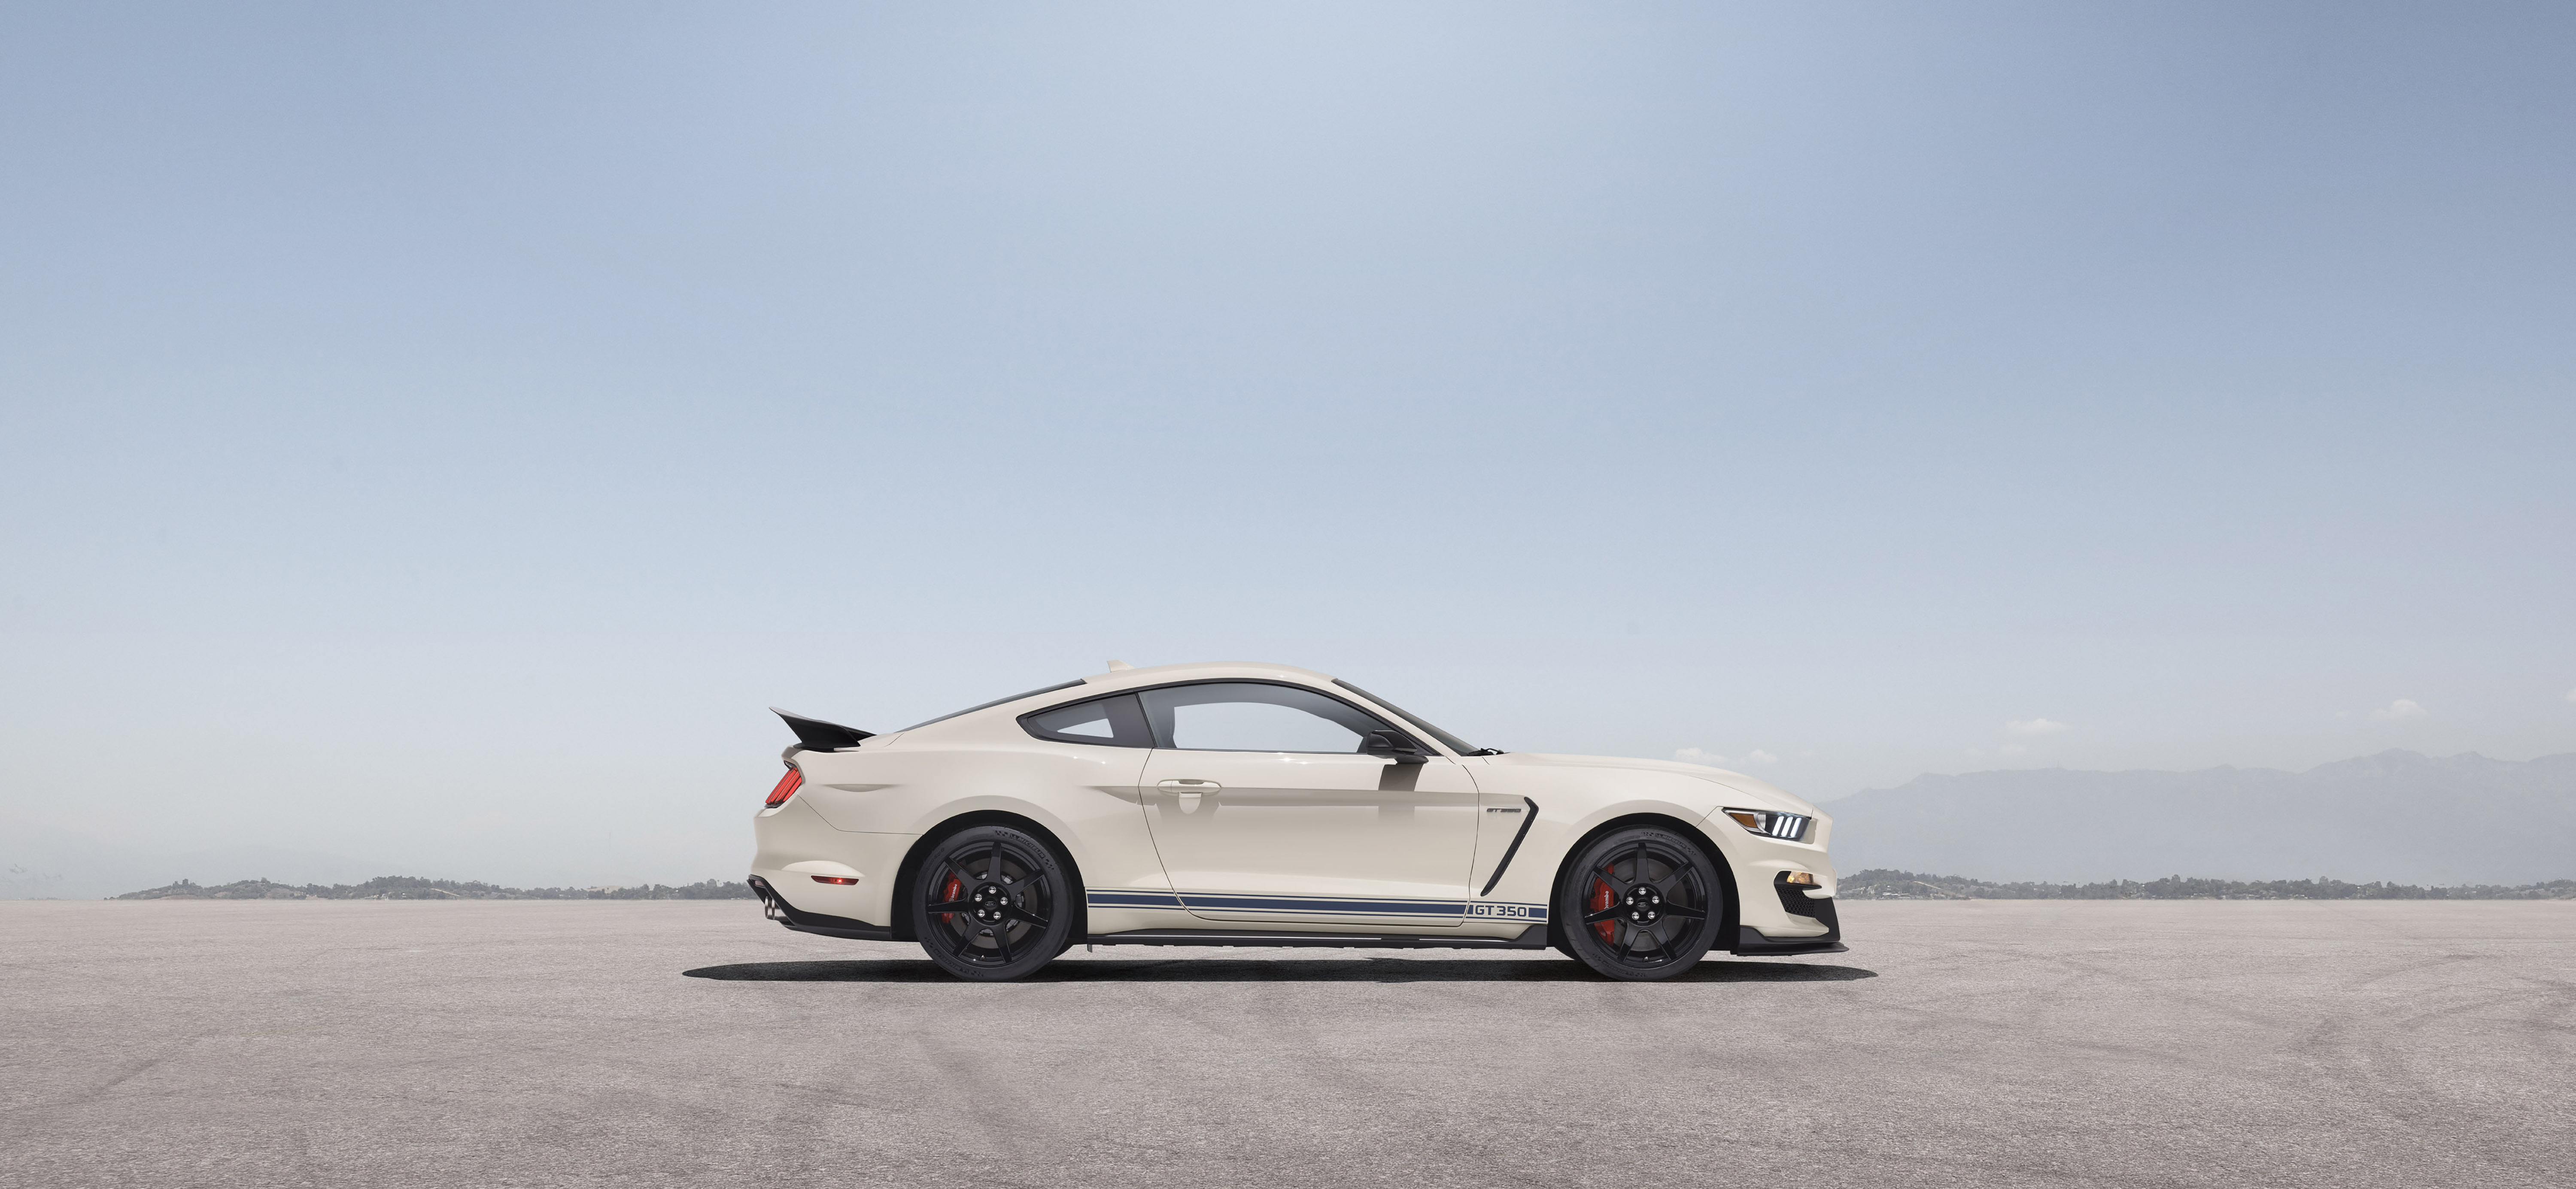 Car Ford Ford Mustang Ford Mustang Shelby Ford Mustang Shelby Gt350 Muscle Car Vehicle White Car 6000x2770